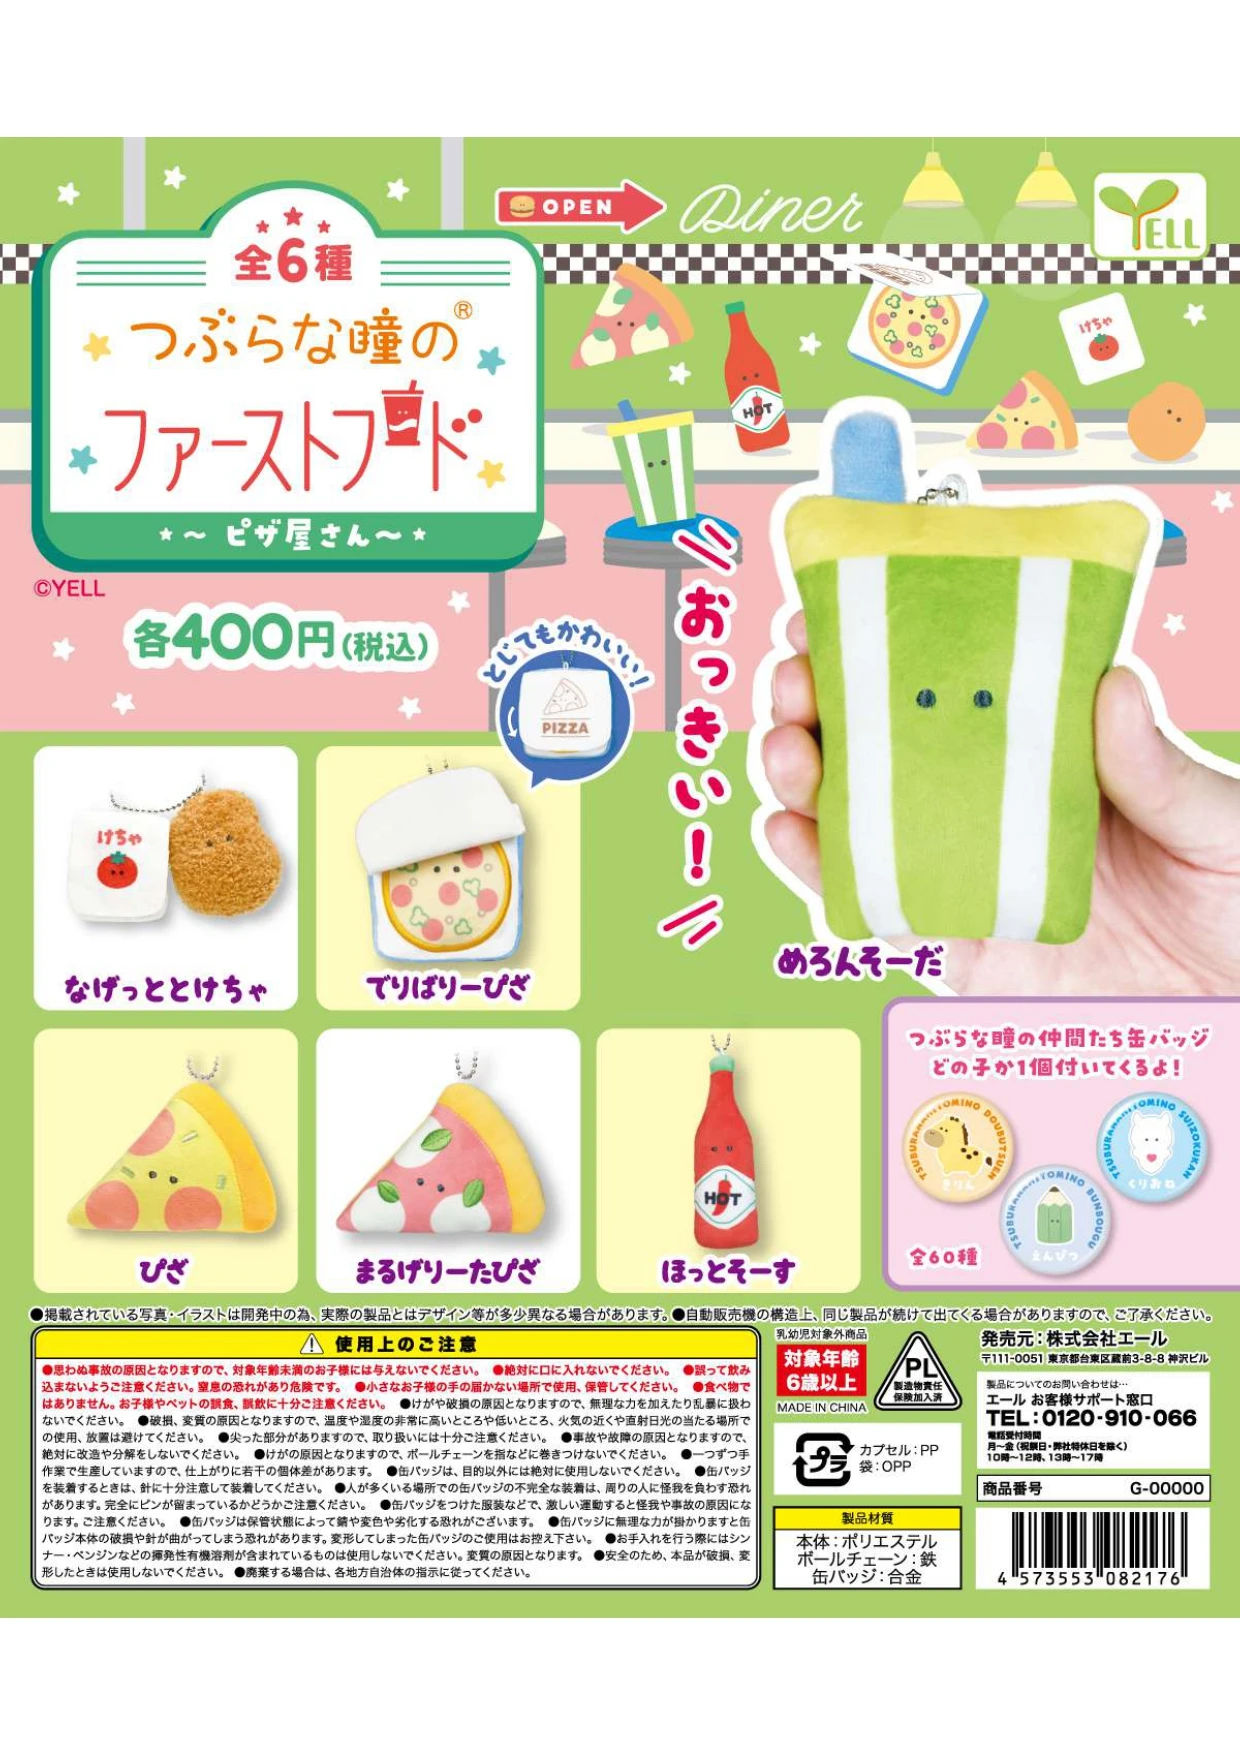 

YELL Original Gashapon Simulation Fast Food Pizza Gachapon Capsule Toy Doll Model Gift Figures Collect Ornament